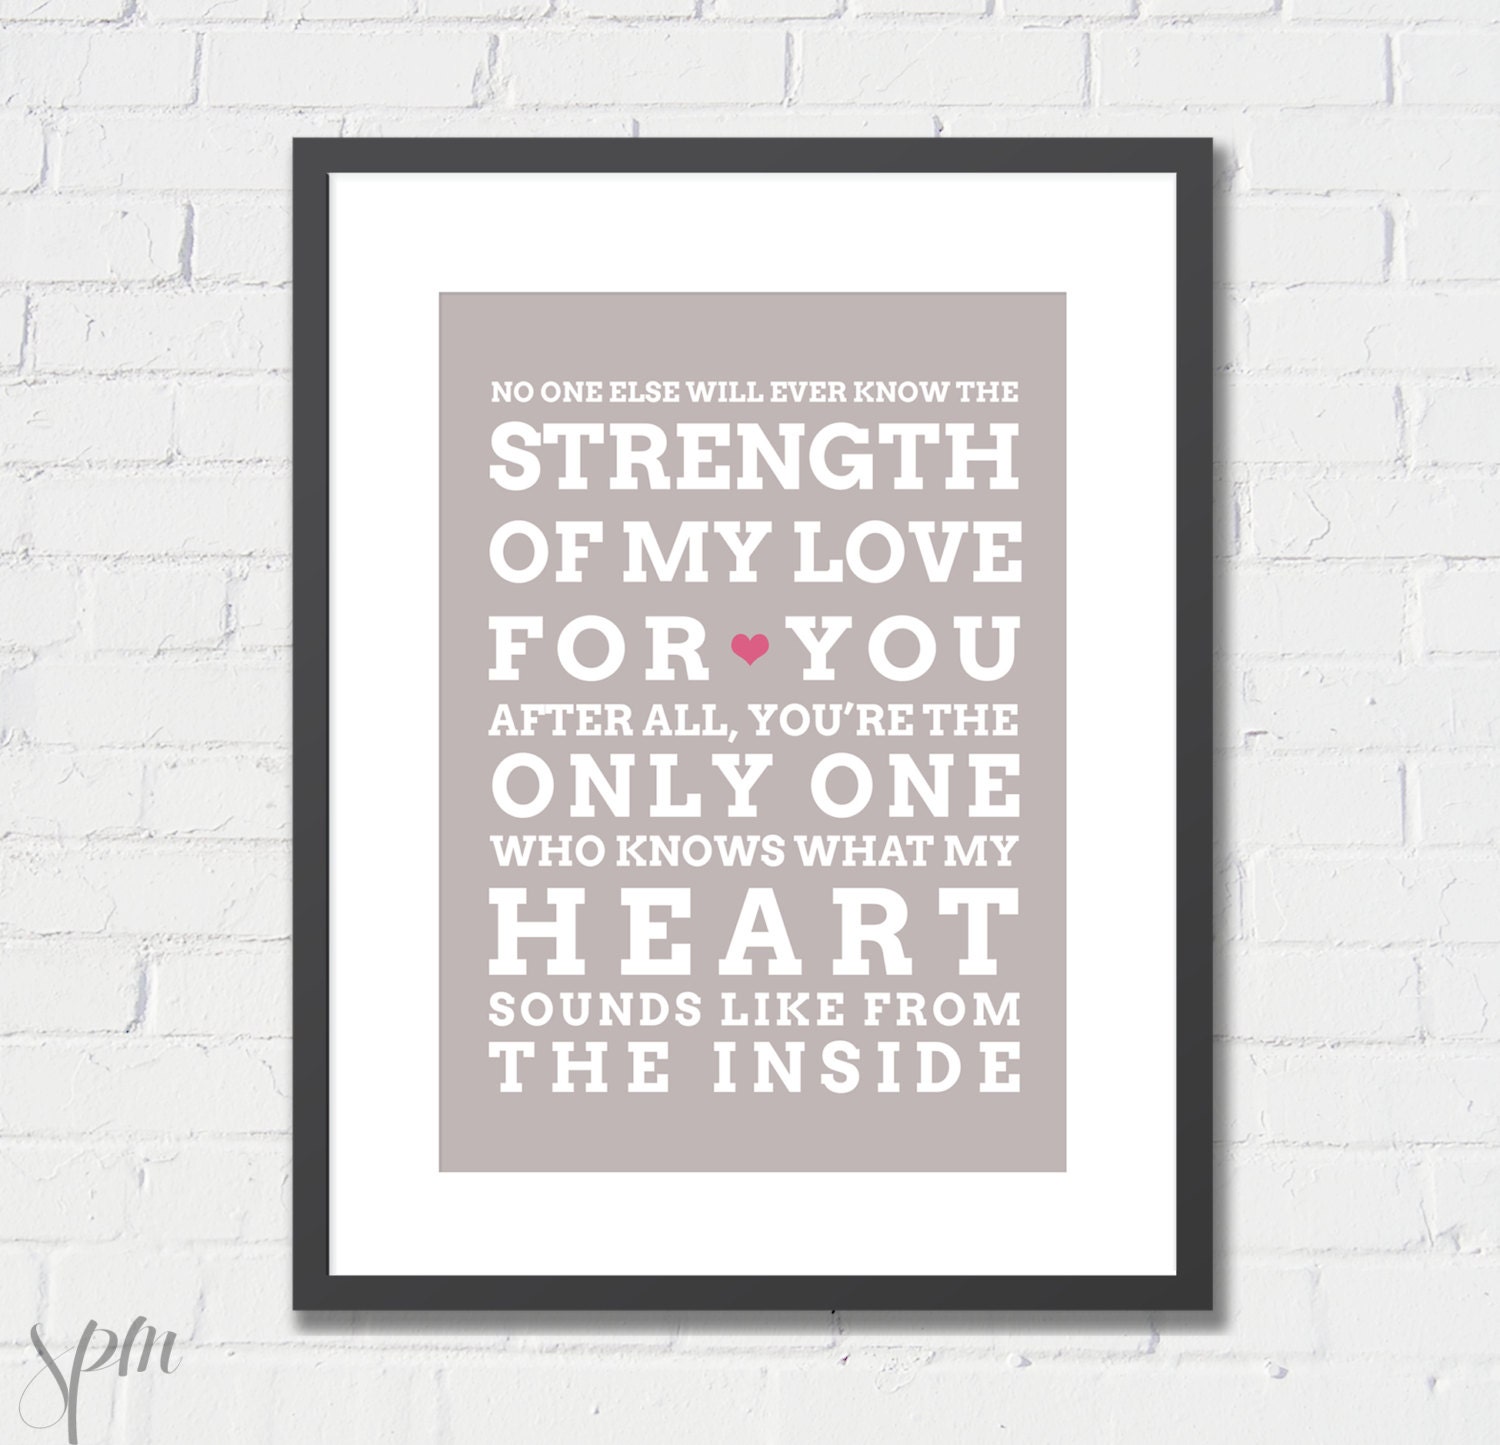 Art Print Strength of My Love for You Archival Print 8x10 or A4